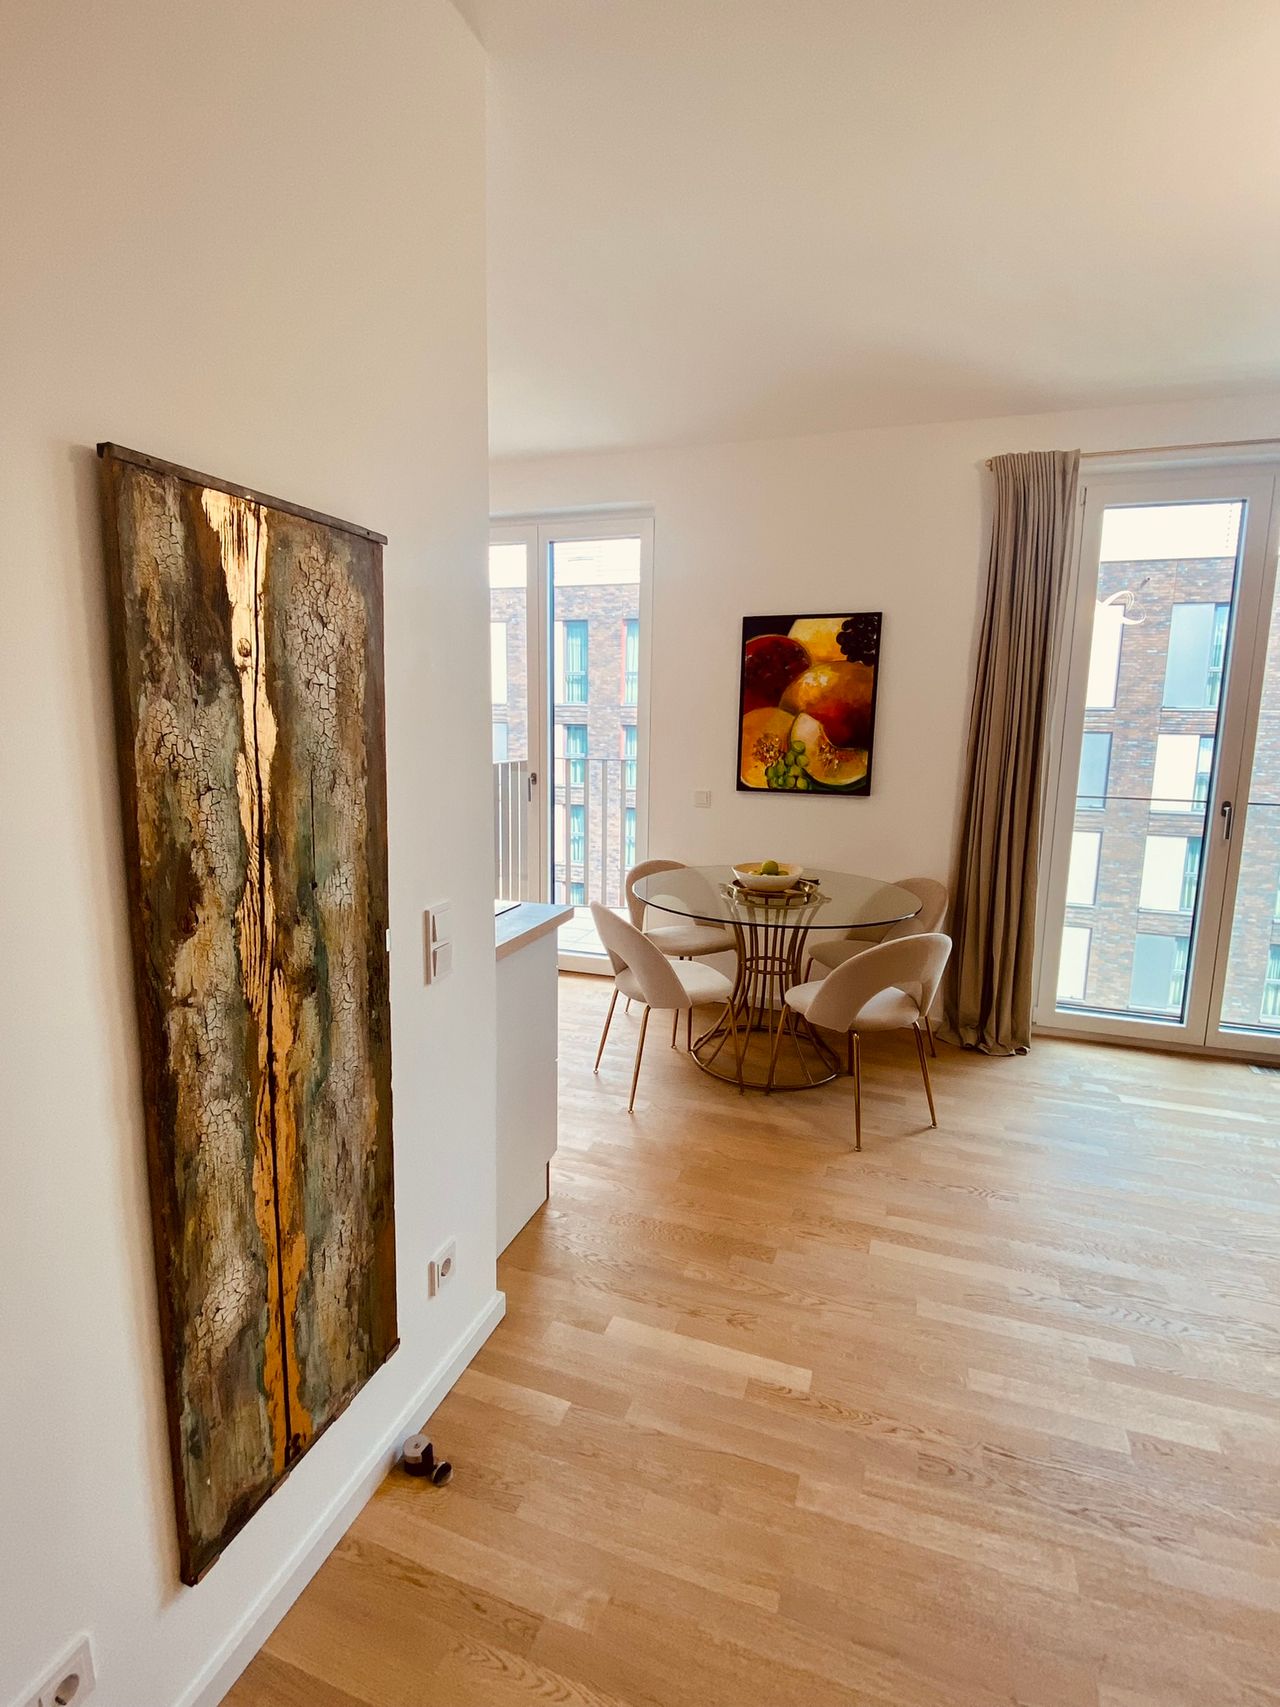 Top location: New luxury apartment with river spree view and concierge